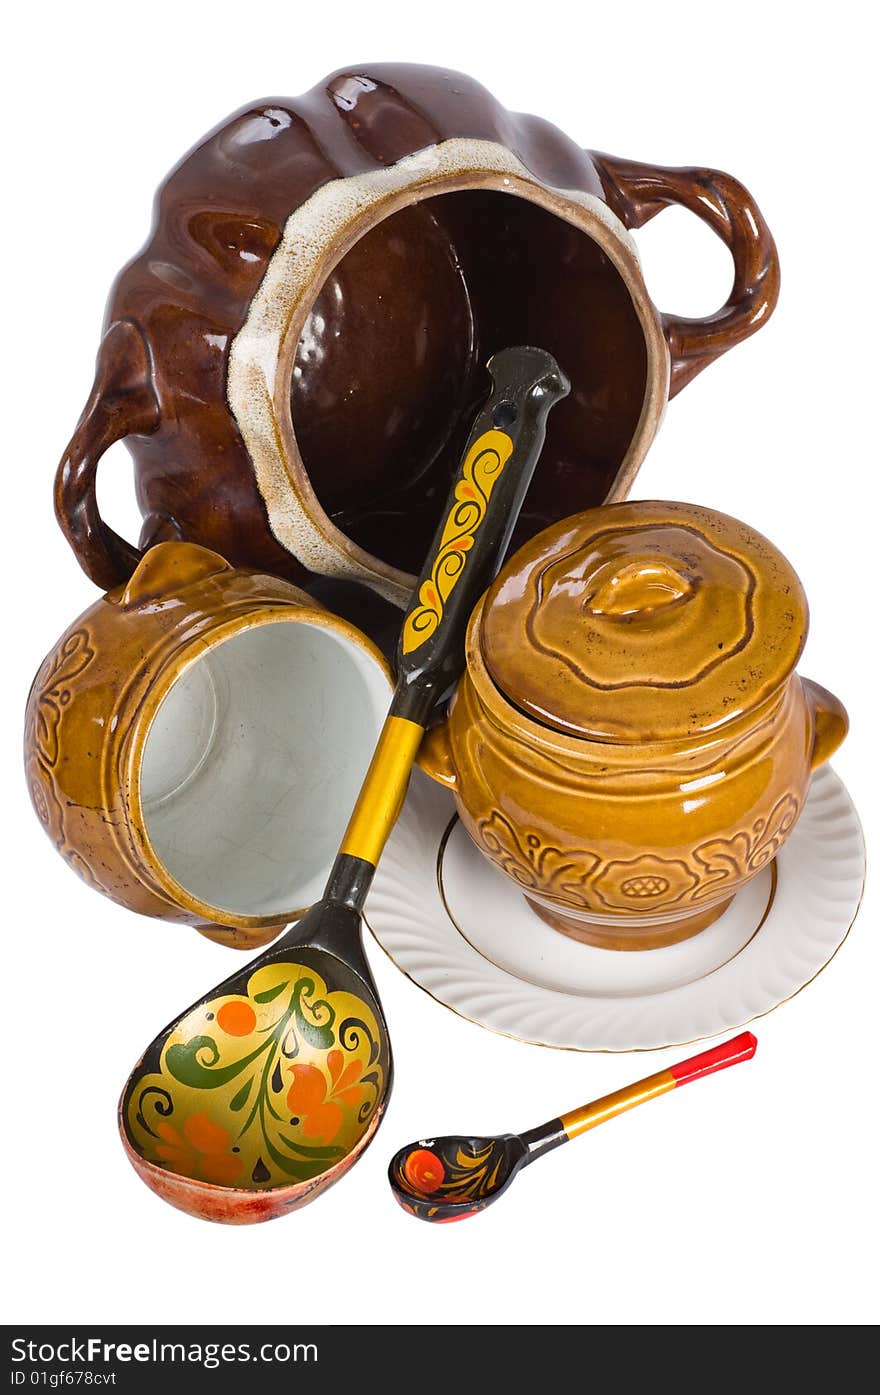 Ceramic ware of two sizes and wooden spoons with drawings. Ceramic ware of two sizes and wooden spoons with drawings.